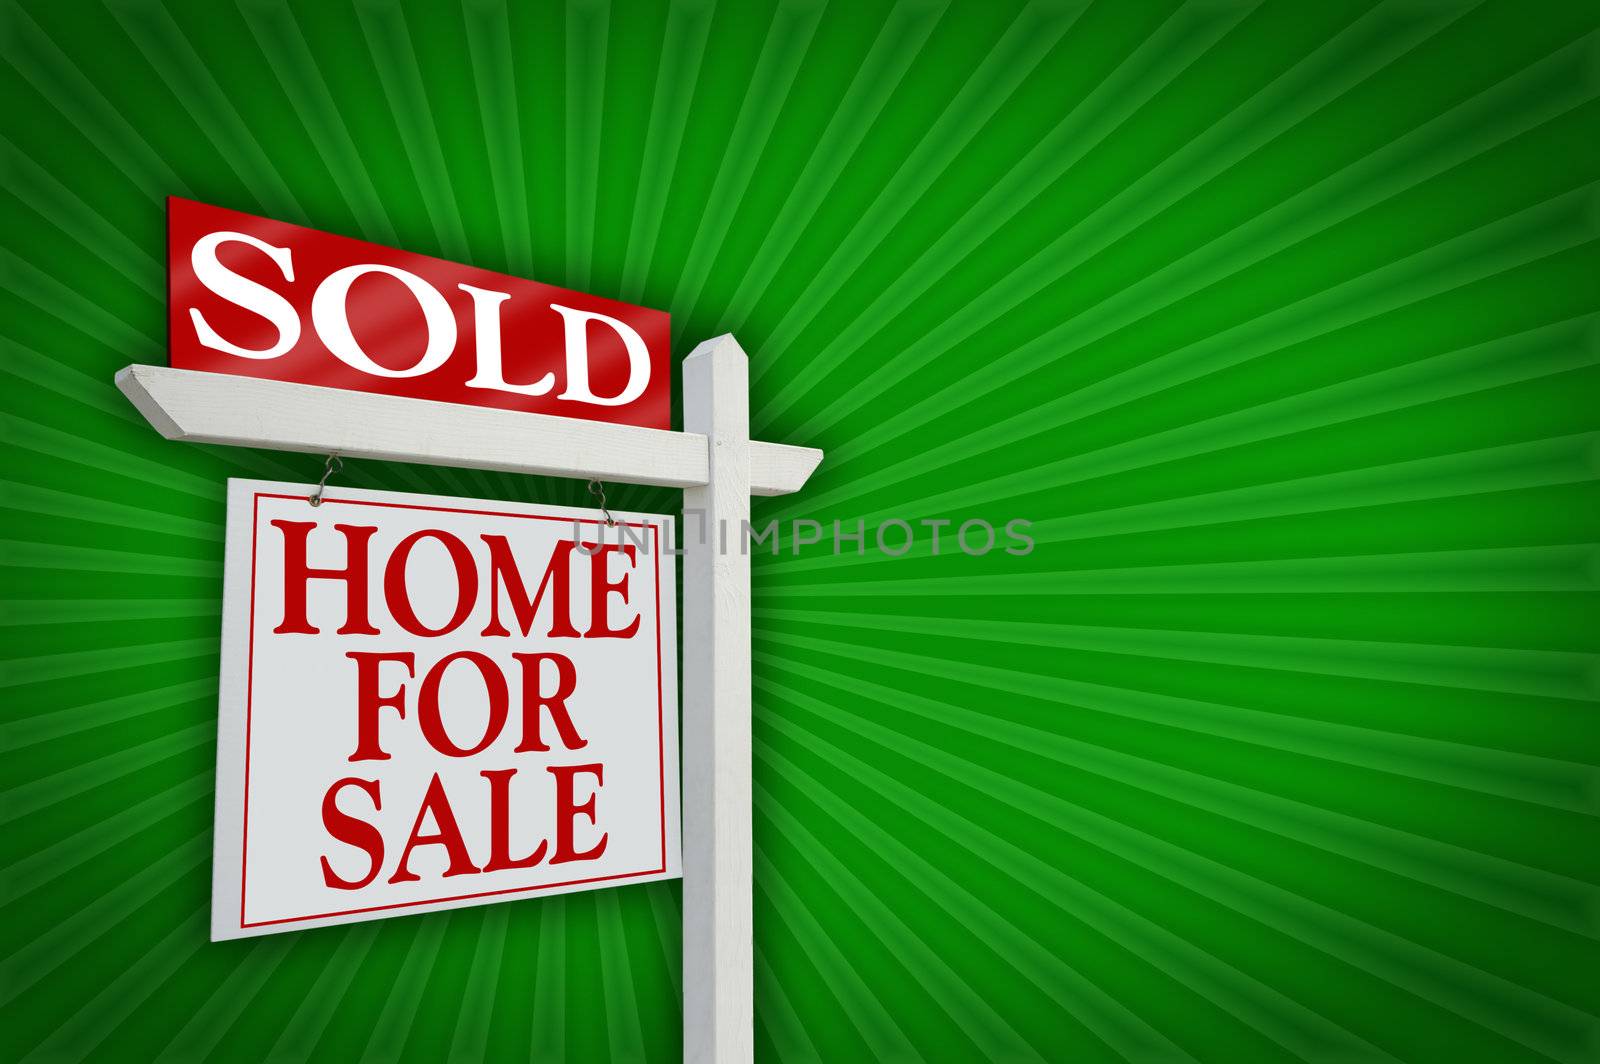 Sold Home for Sale Sign  by Feverpitched